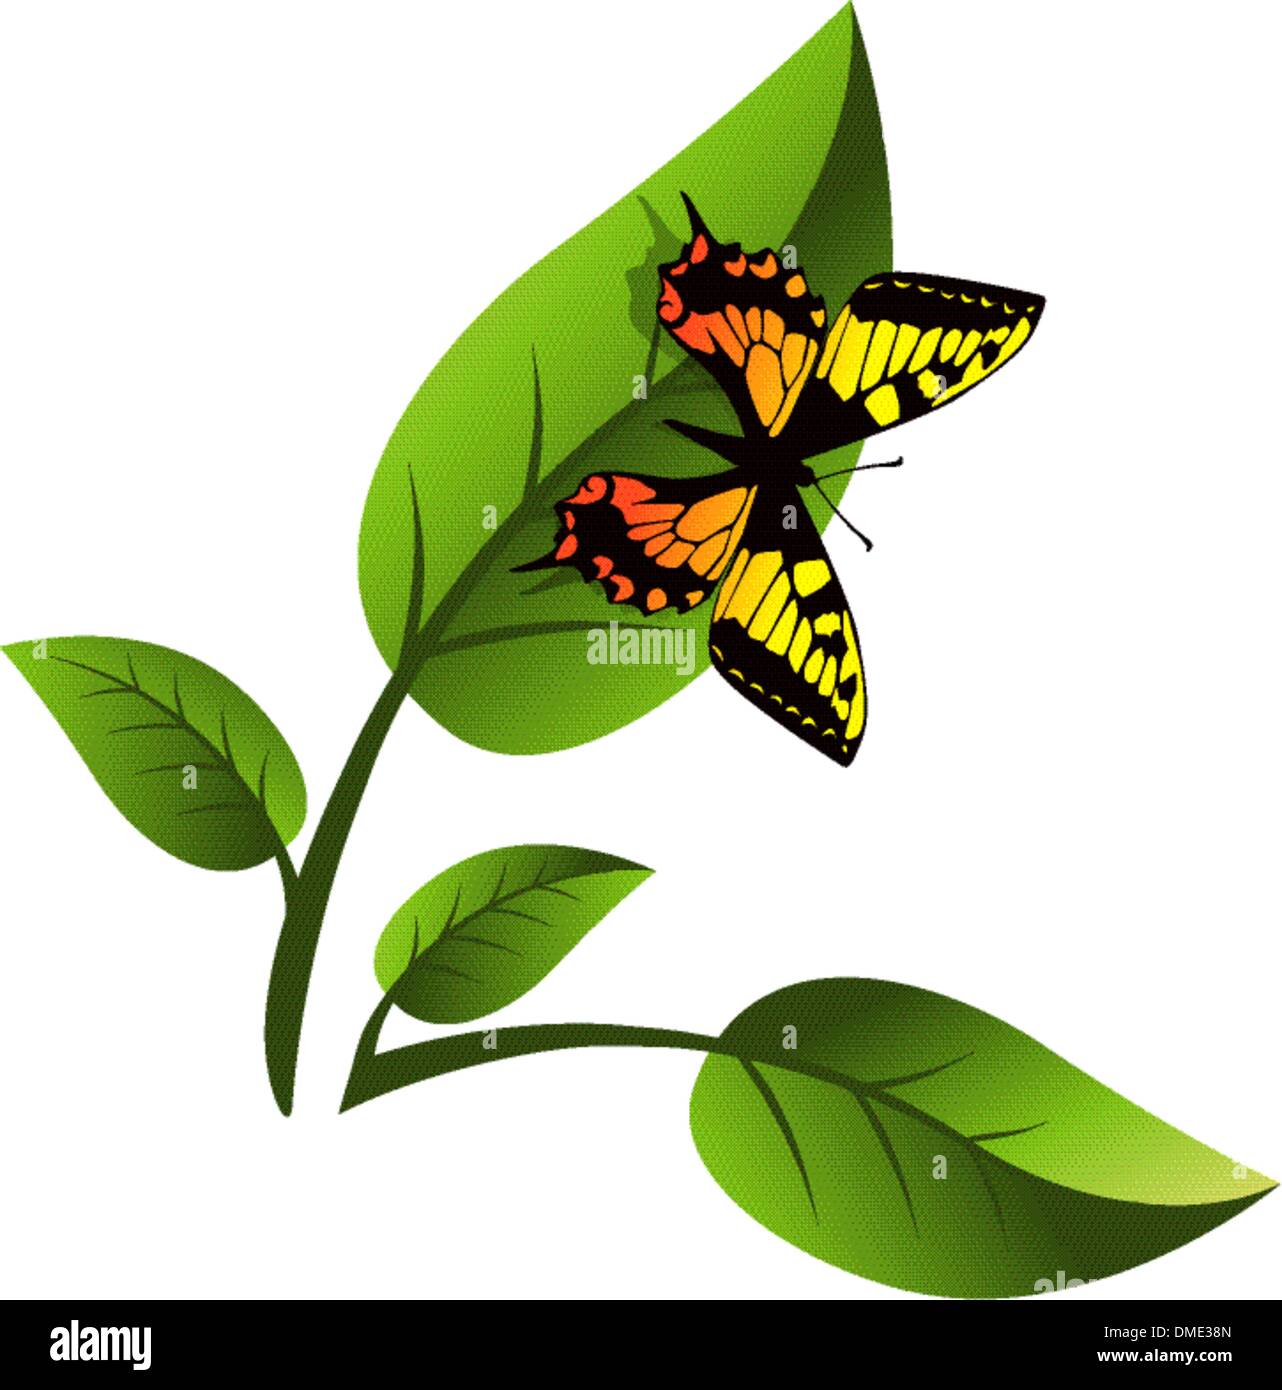 Leaf and Butterfly Stock Vector